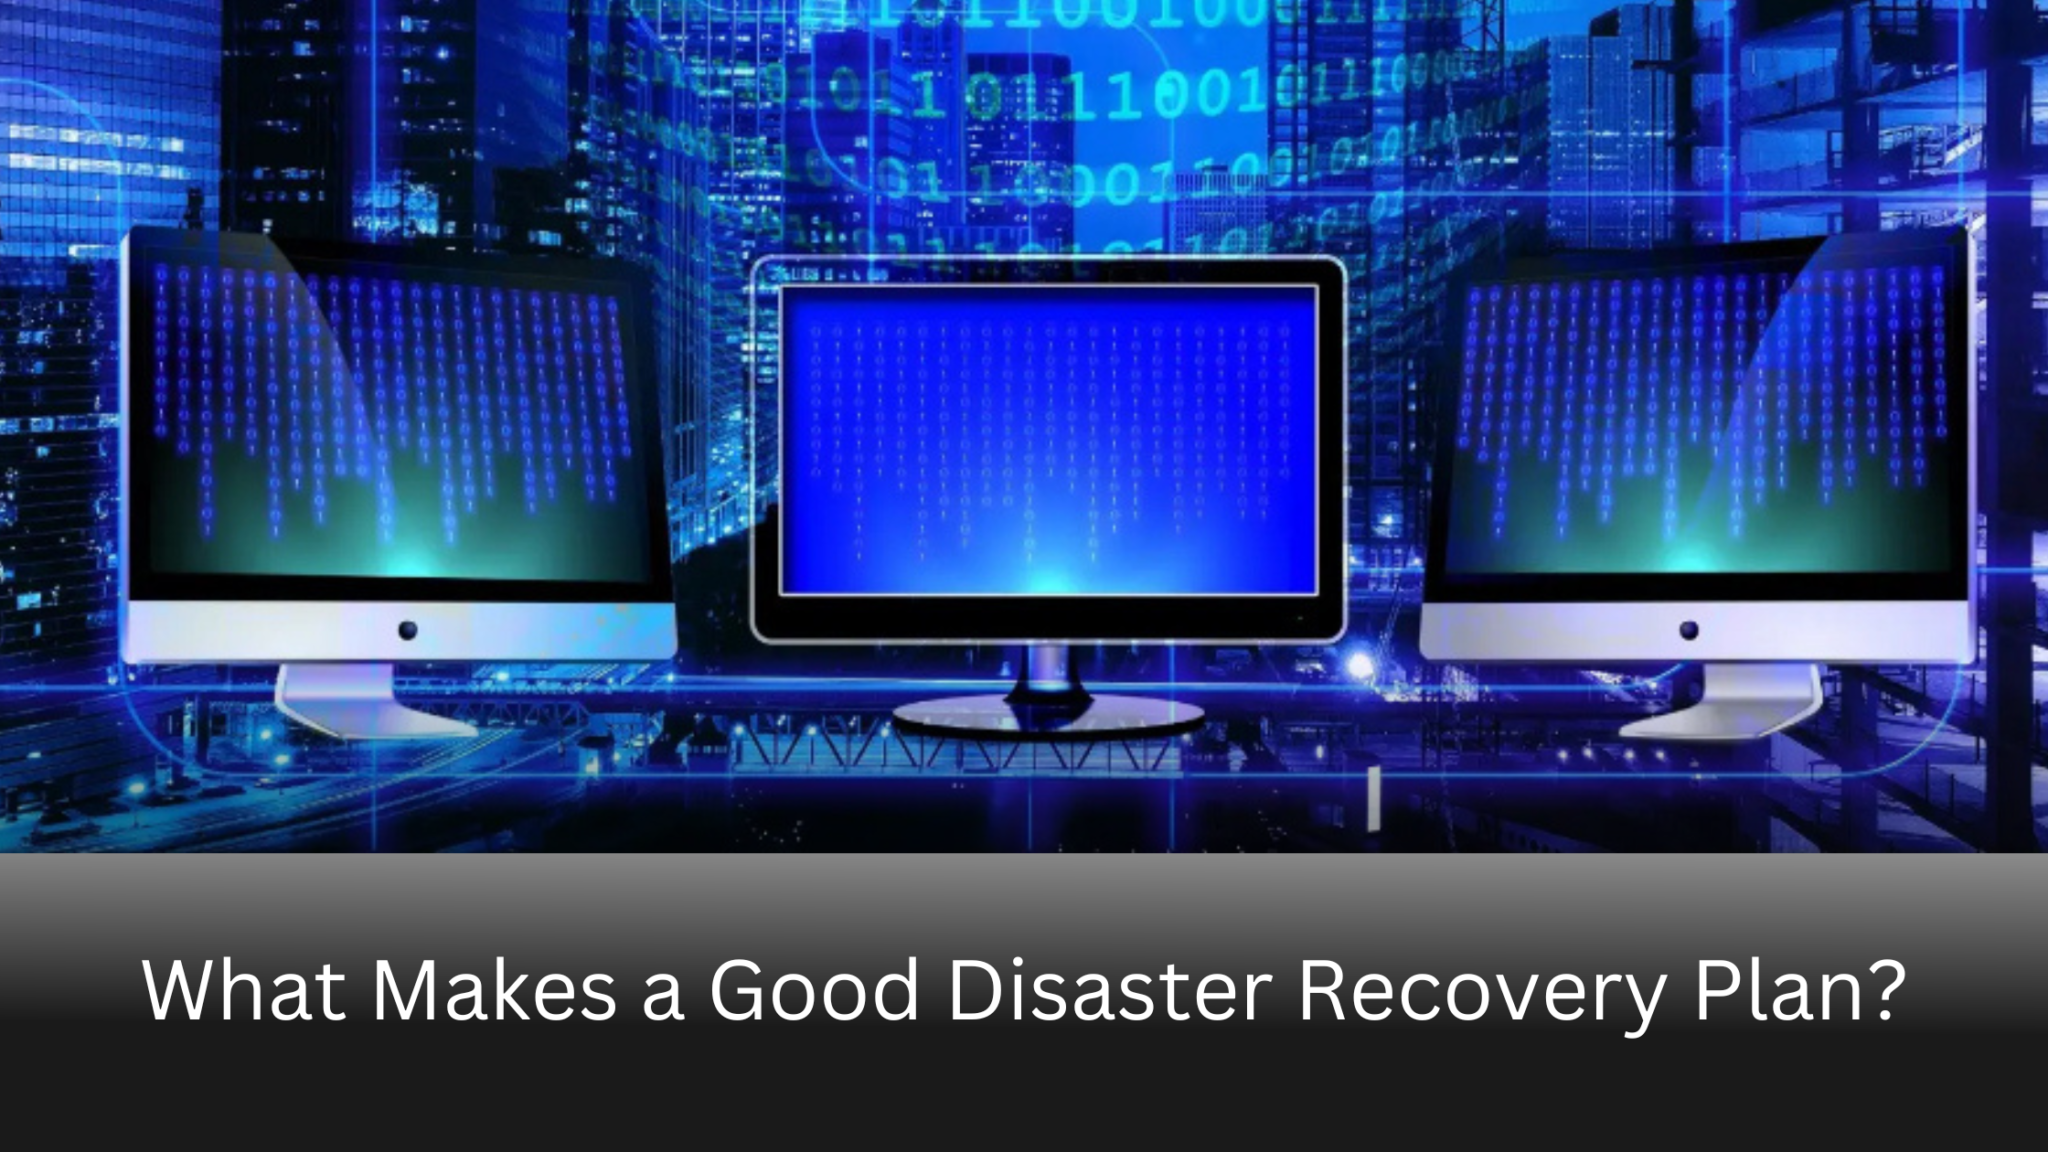 What Makes a Good Disaster Recovery Plan?